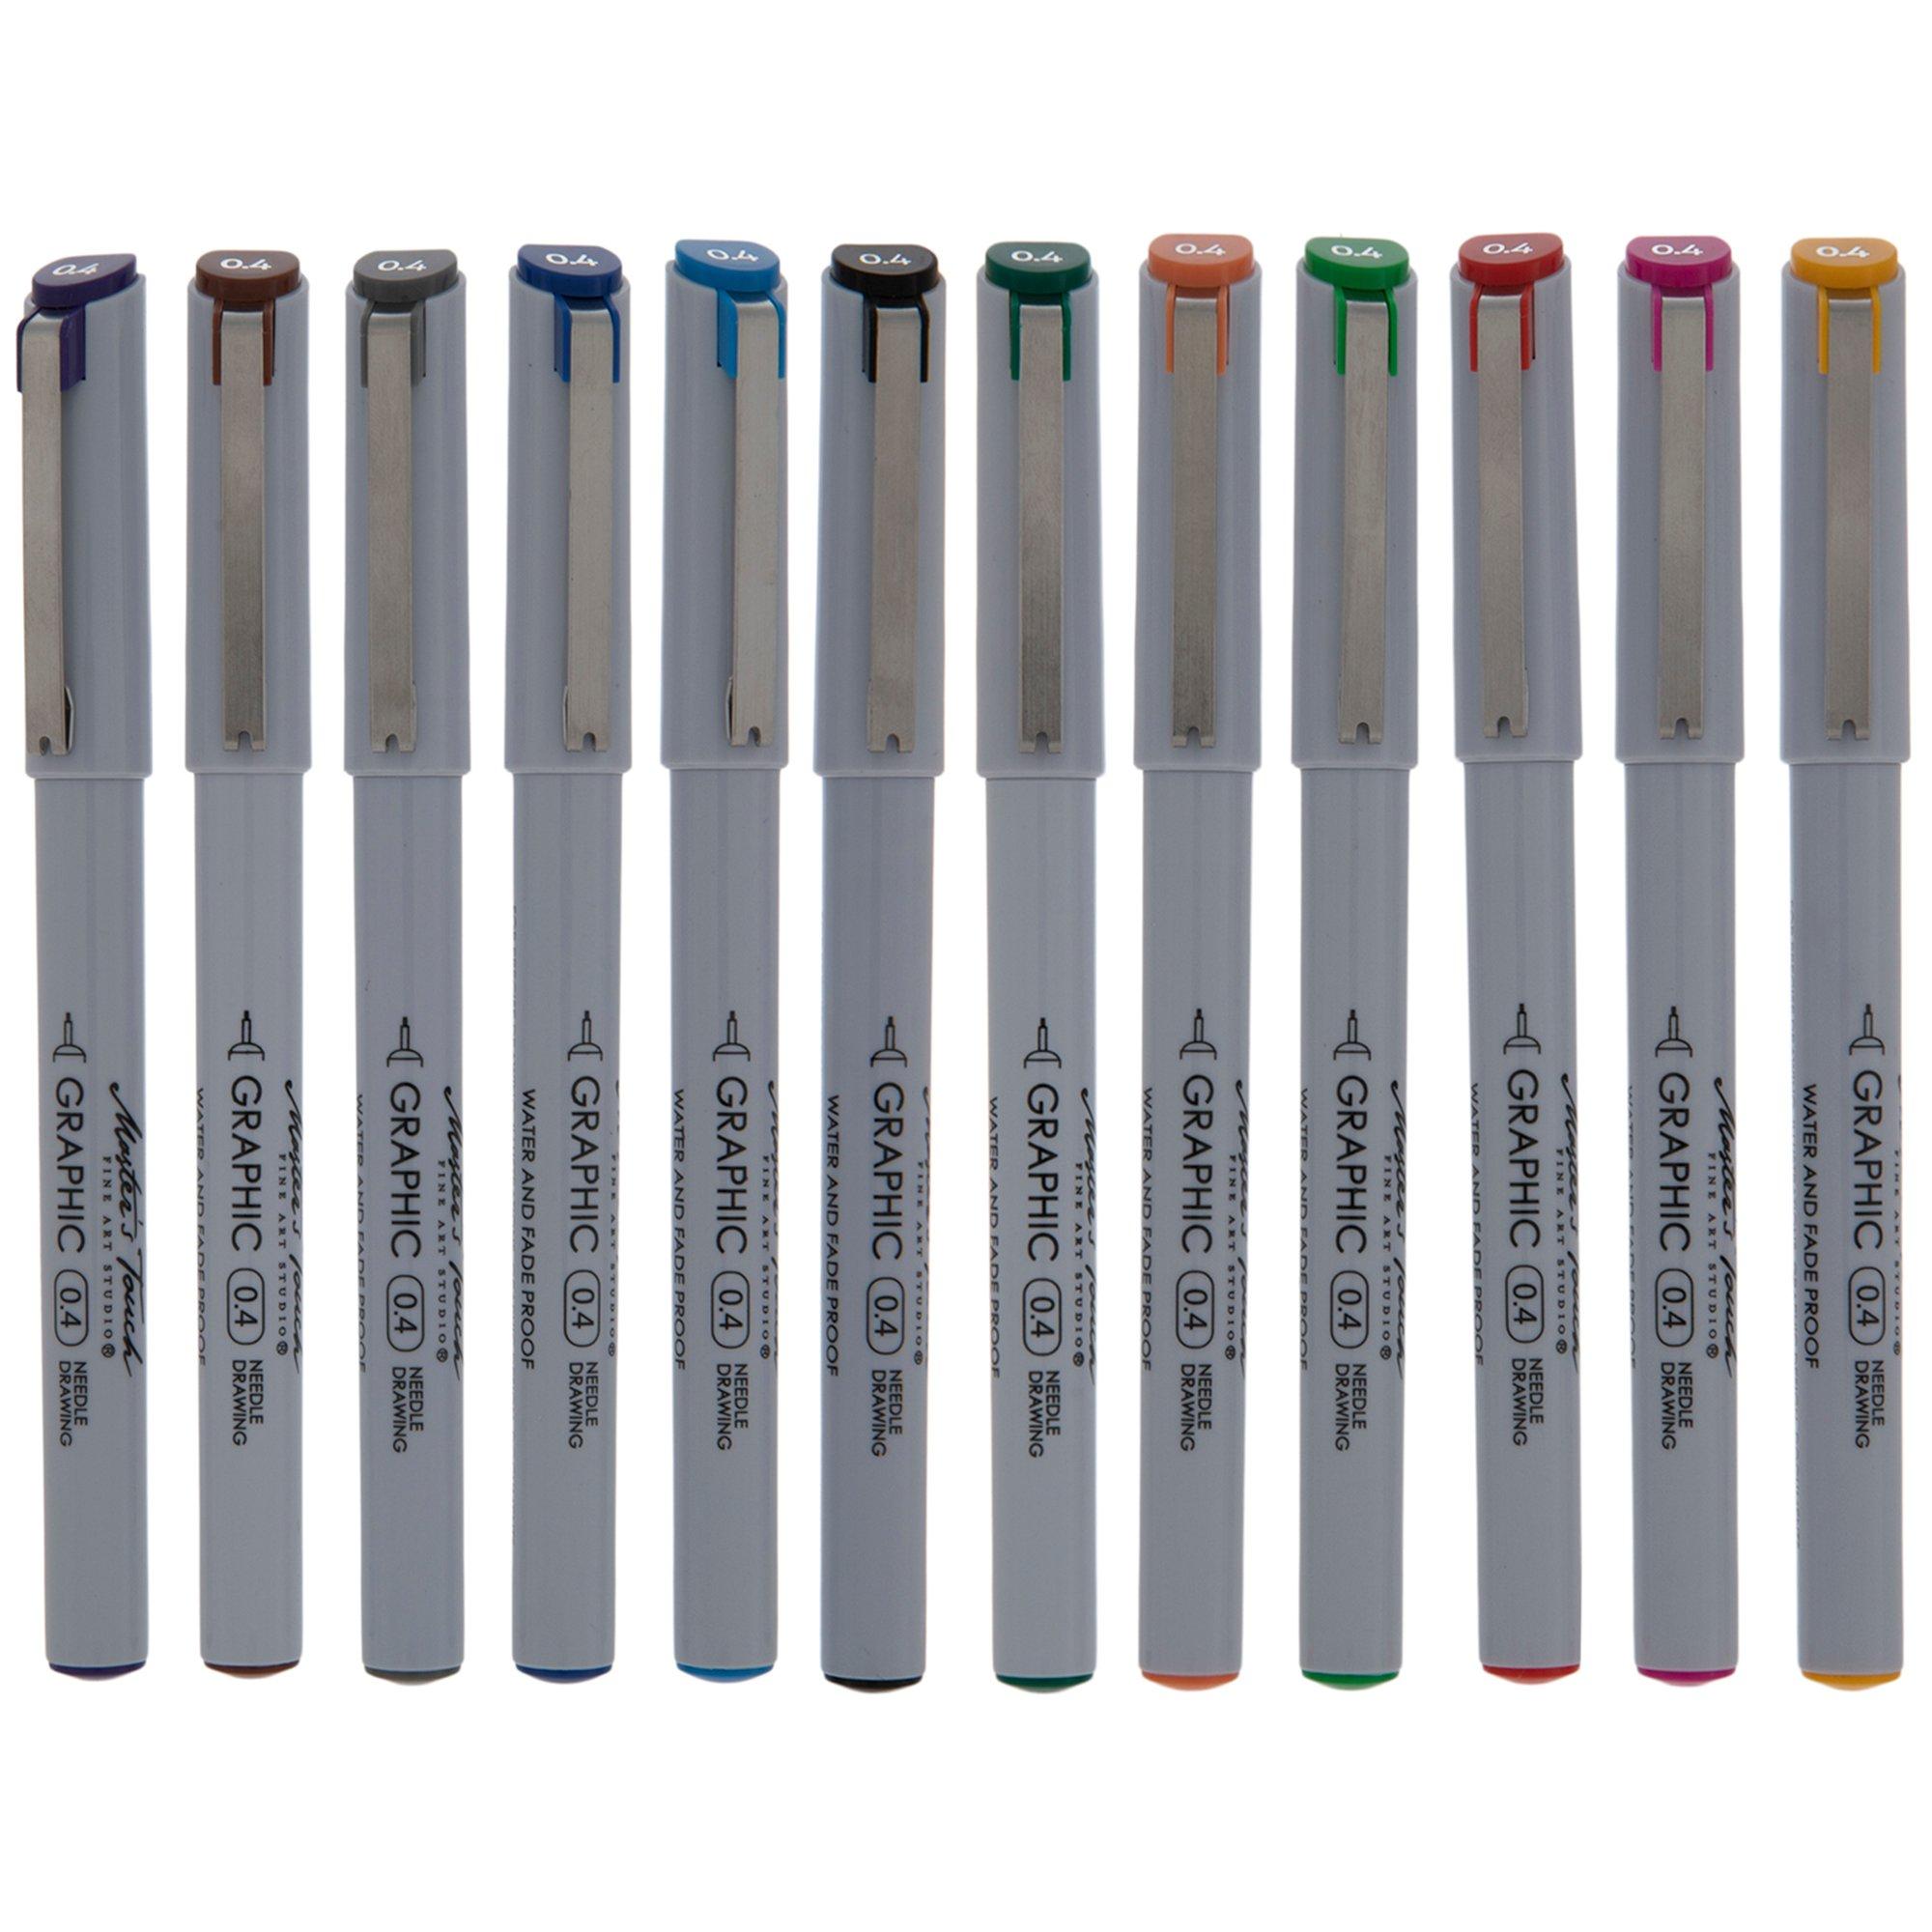 Master's Touch Fineliner Twin Tip Markers, Hobby Lobby